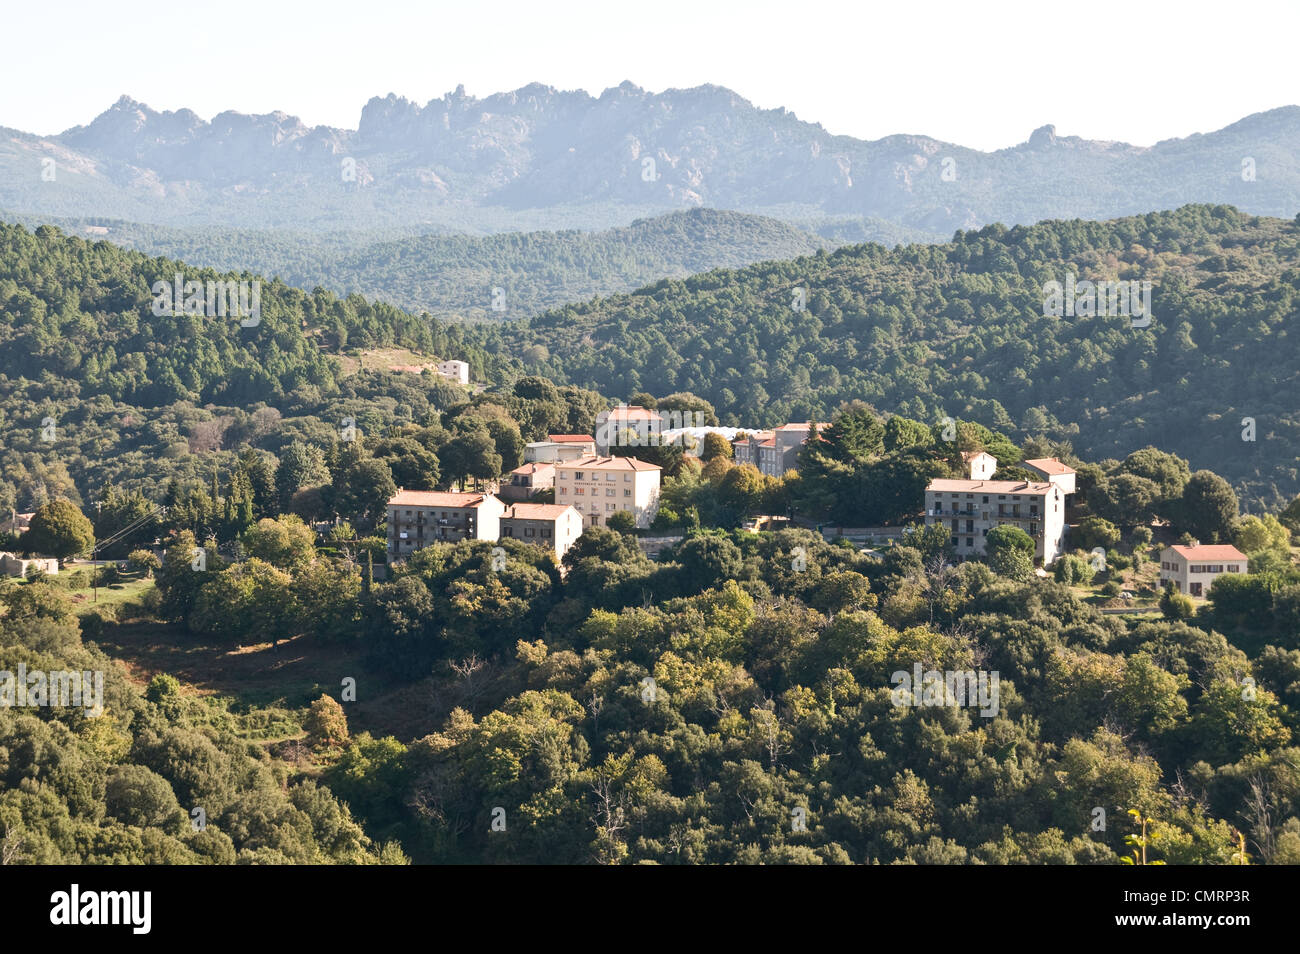 The village of Levie amid an oak forest and mountains in the Alta Rocca region in the southern interior of Corsica, France. Stock Photo